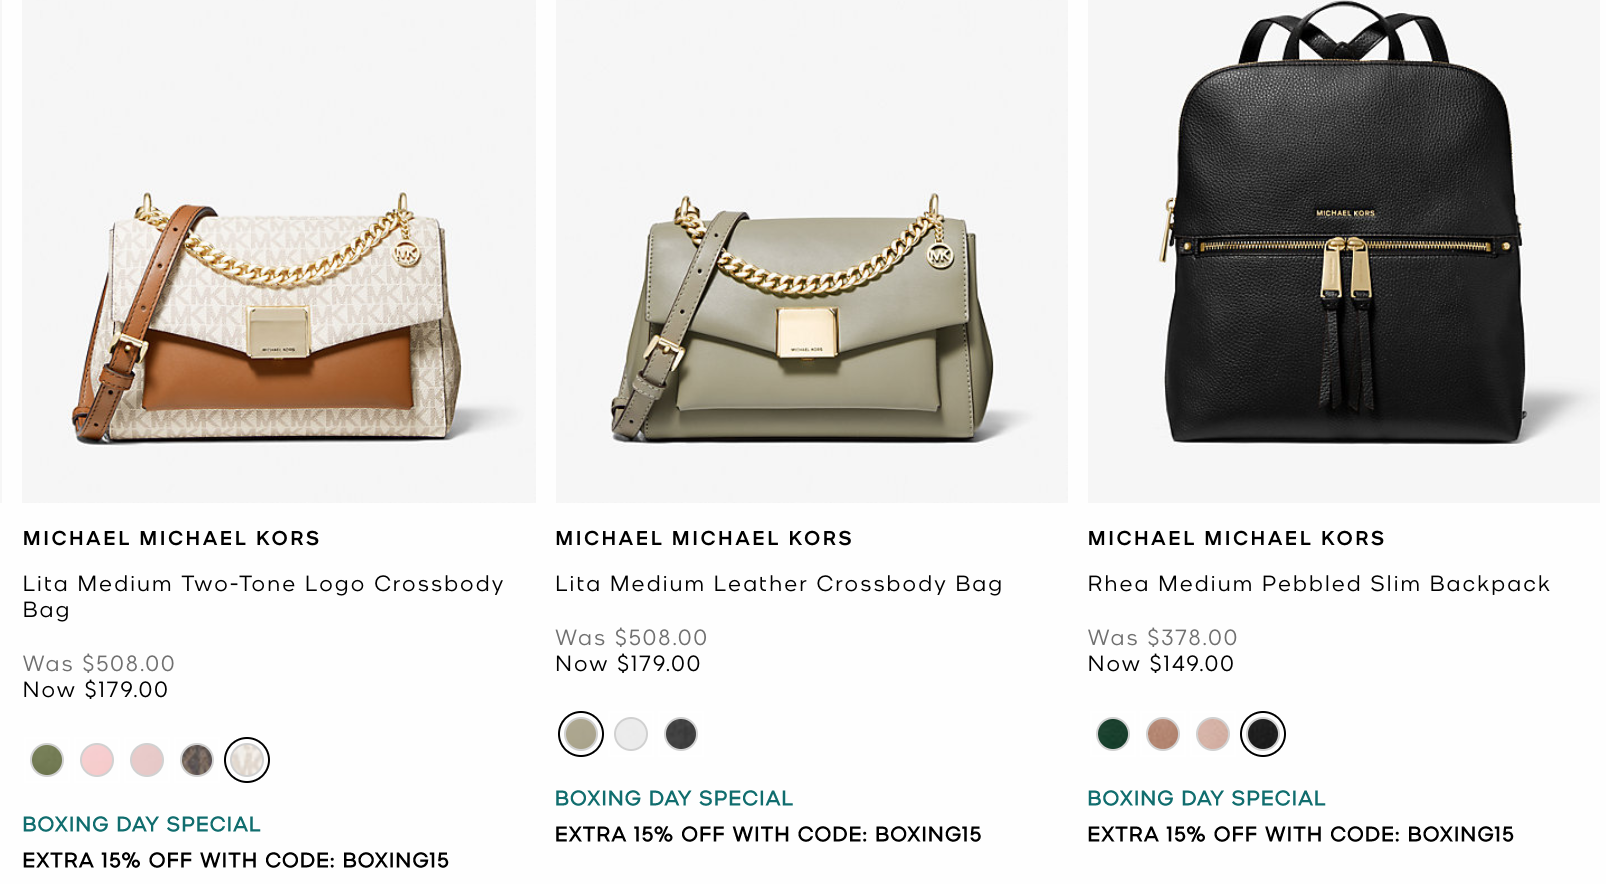 Michael Kors Canada Boxing Day Sale: Save an Extra 15% Off Sale Styles  Using Coupon Code + Up to 60% Off Sale + Free Shipping - Canadian Freebies,  Coupons, Deals, Bargains, Flyers,